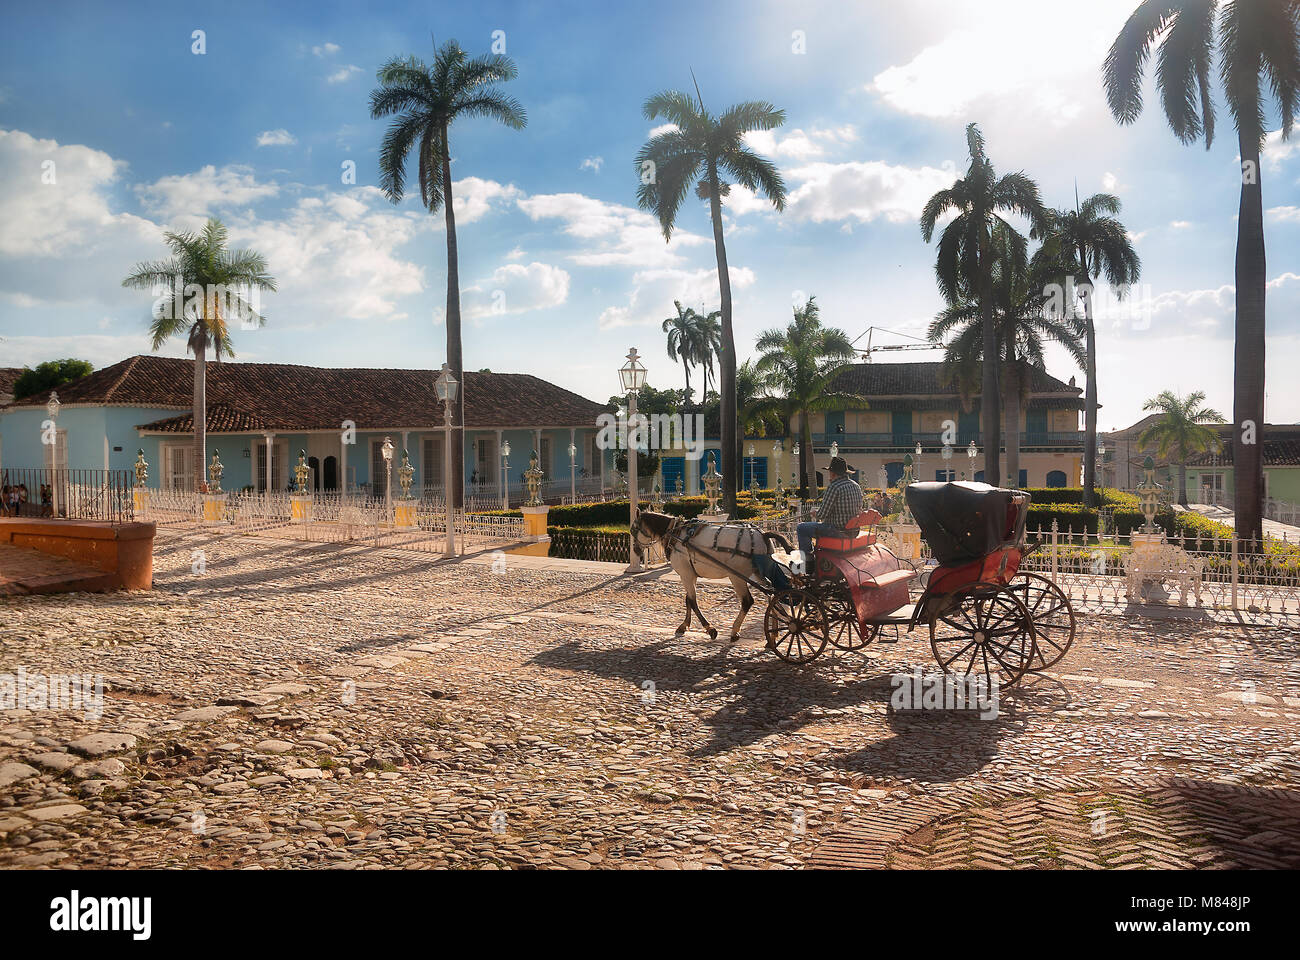 The central square of the historic center of Trinidad with a carriage in the foreground. Stock Photo